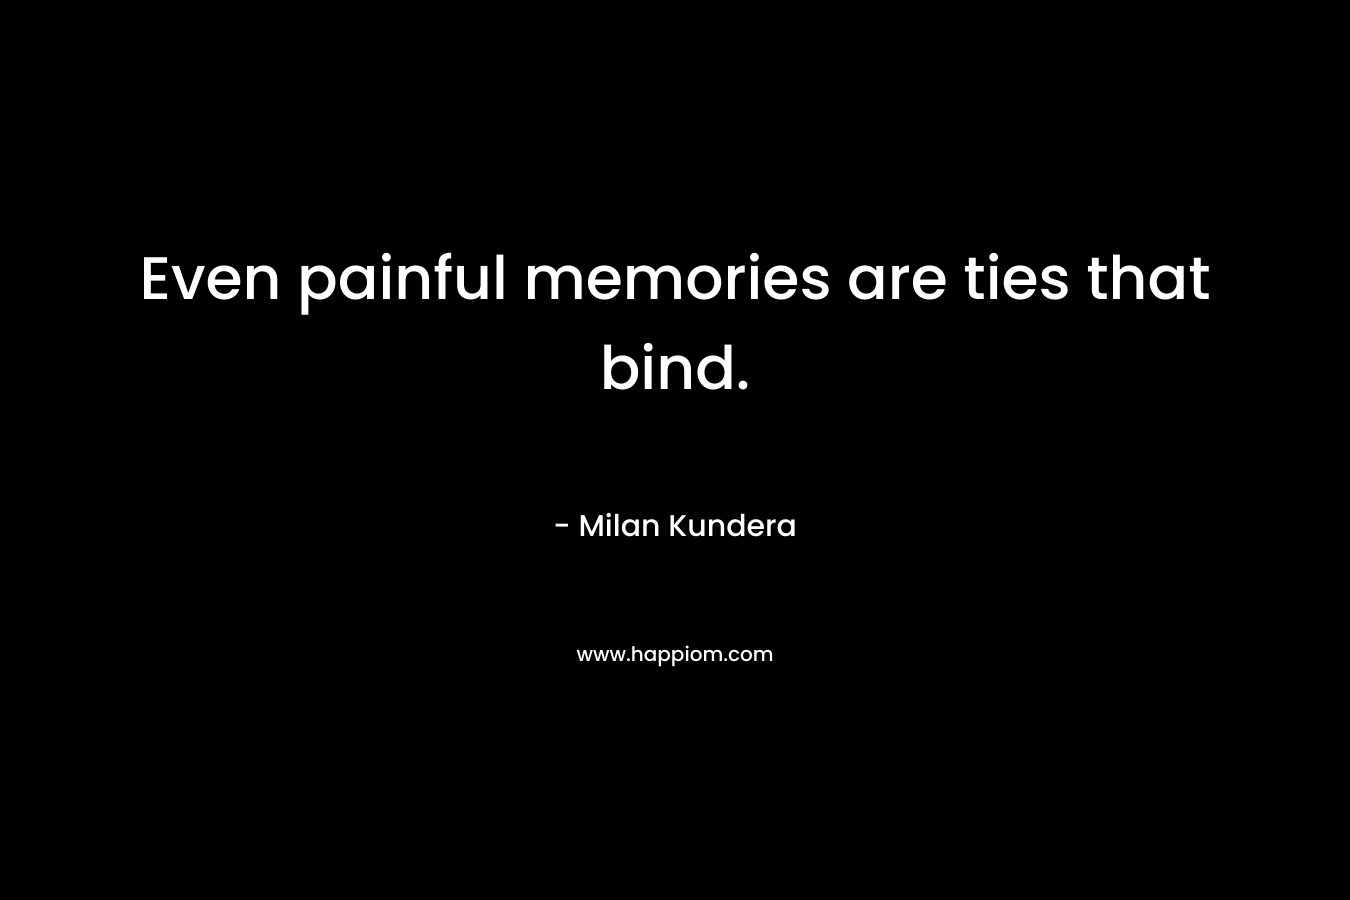 Even painful memories are ties that bind.